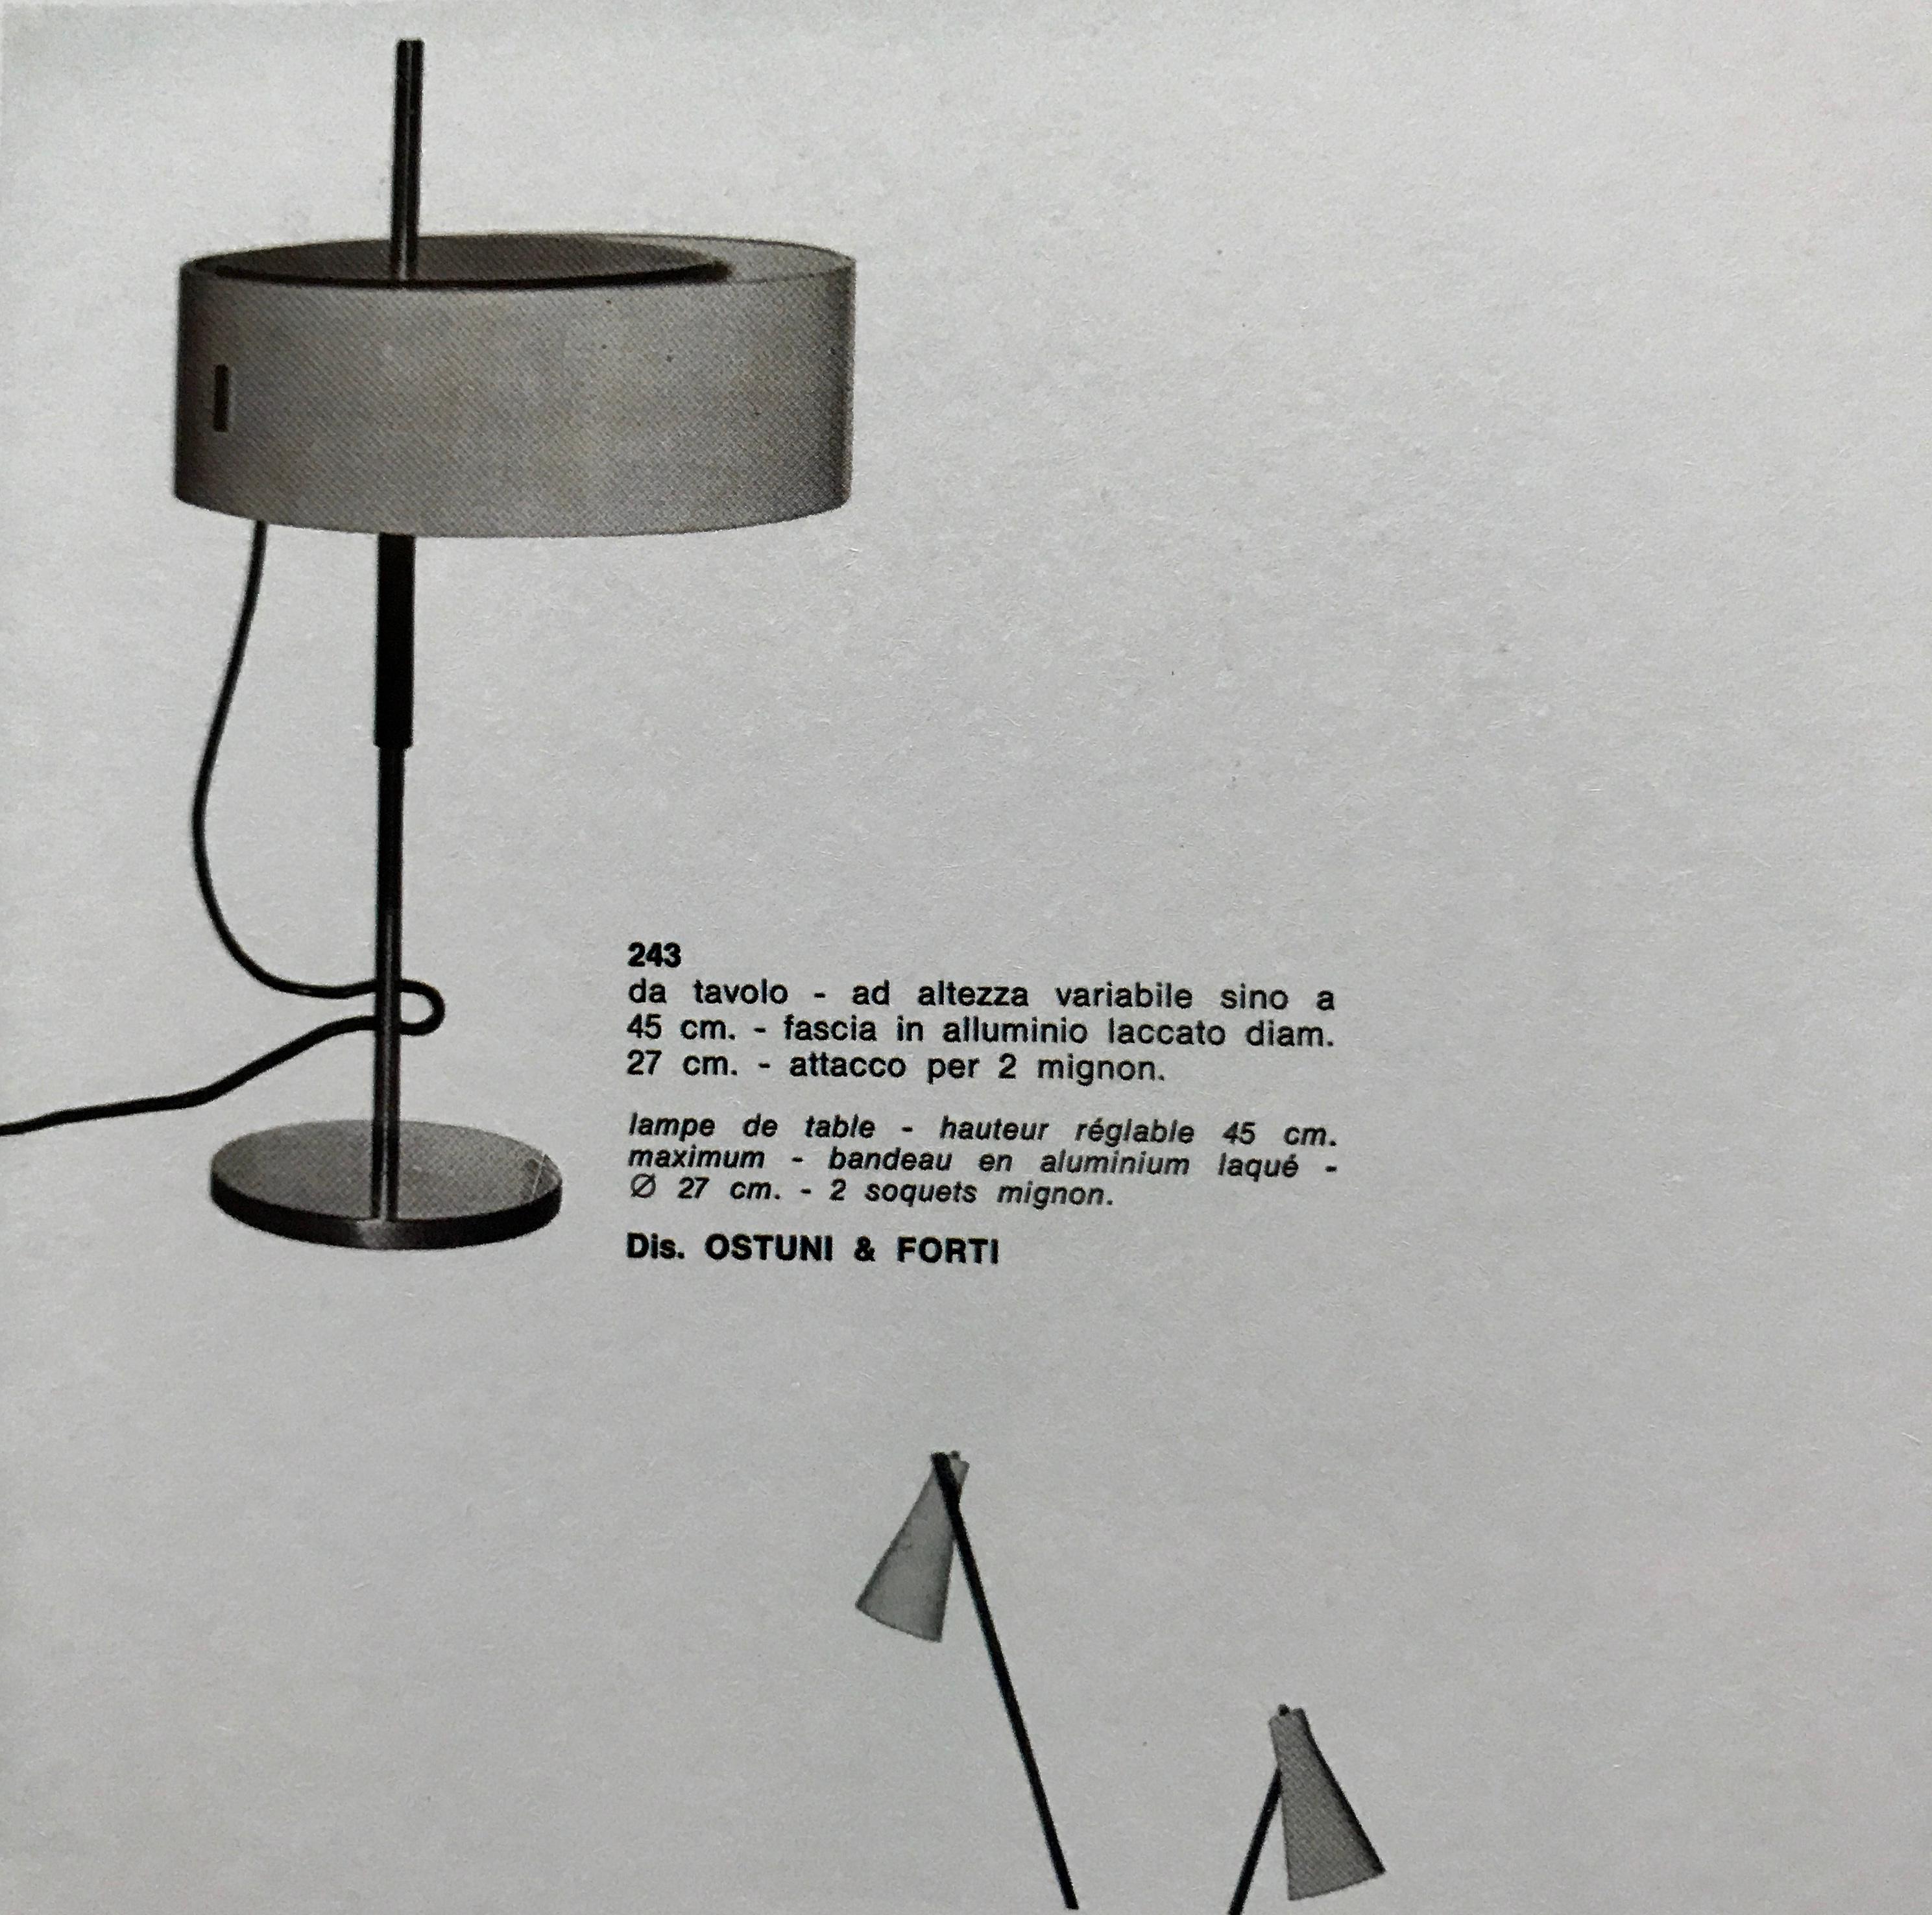 1950s Giuseppe Ostuni 243 table lamp for O-Luce. Executed in black painted metal and brass. An iconic table lamp by one of the masters of midcentury Italian design. Fluid and refined in its conception and execution. A clean example.

Literature